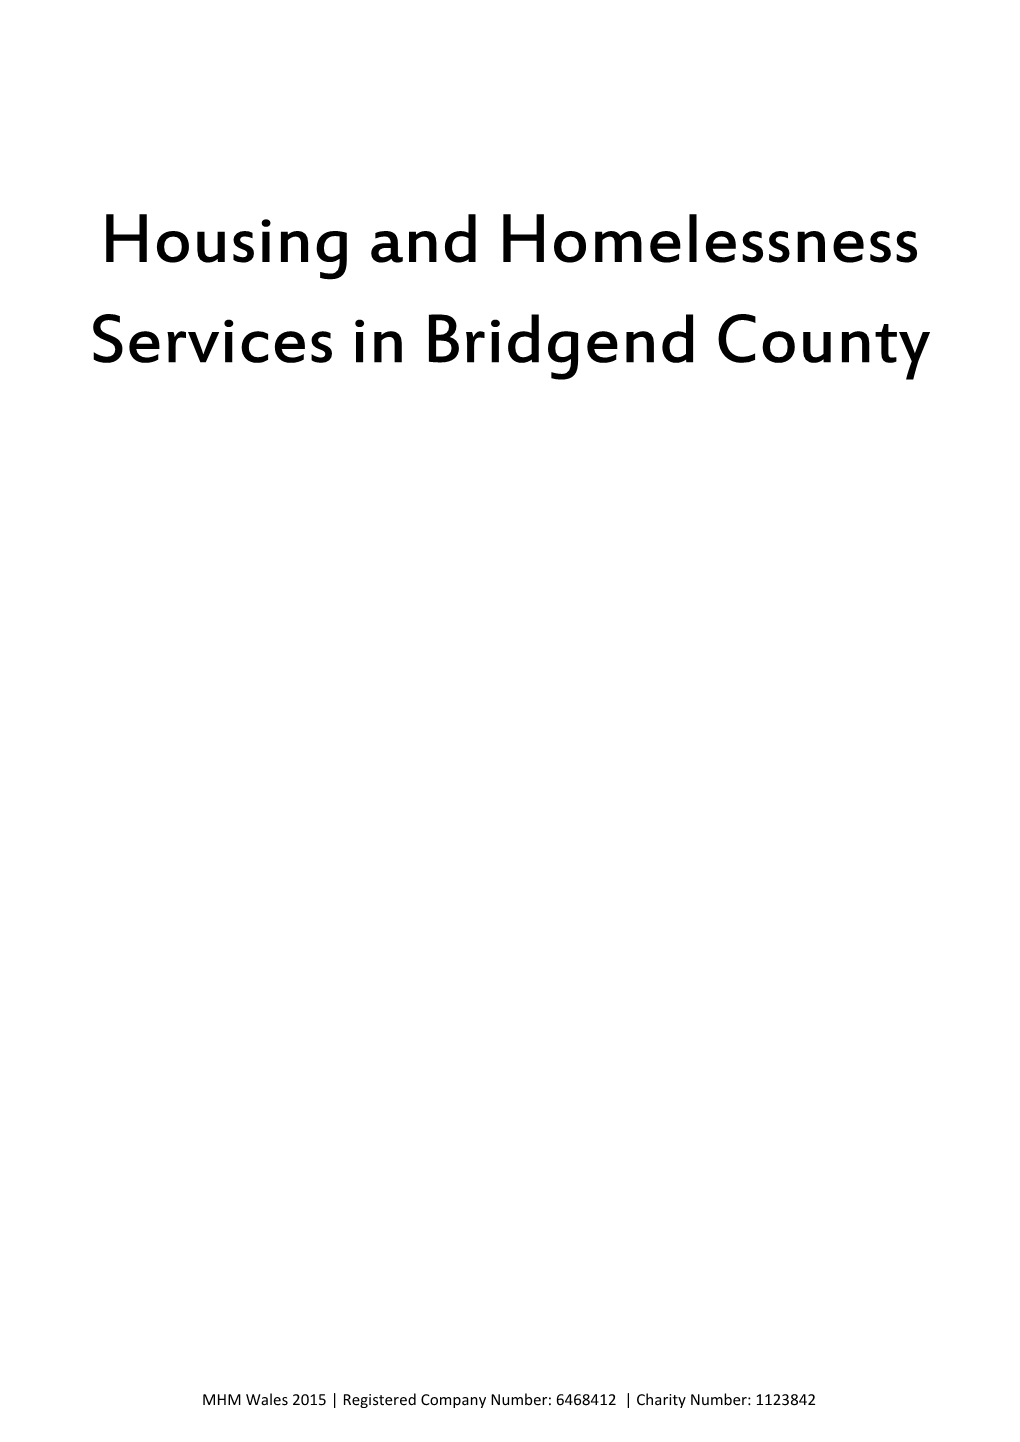 Housing and Homelessness Services in Bridgend County